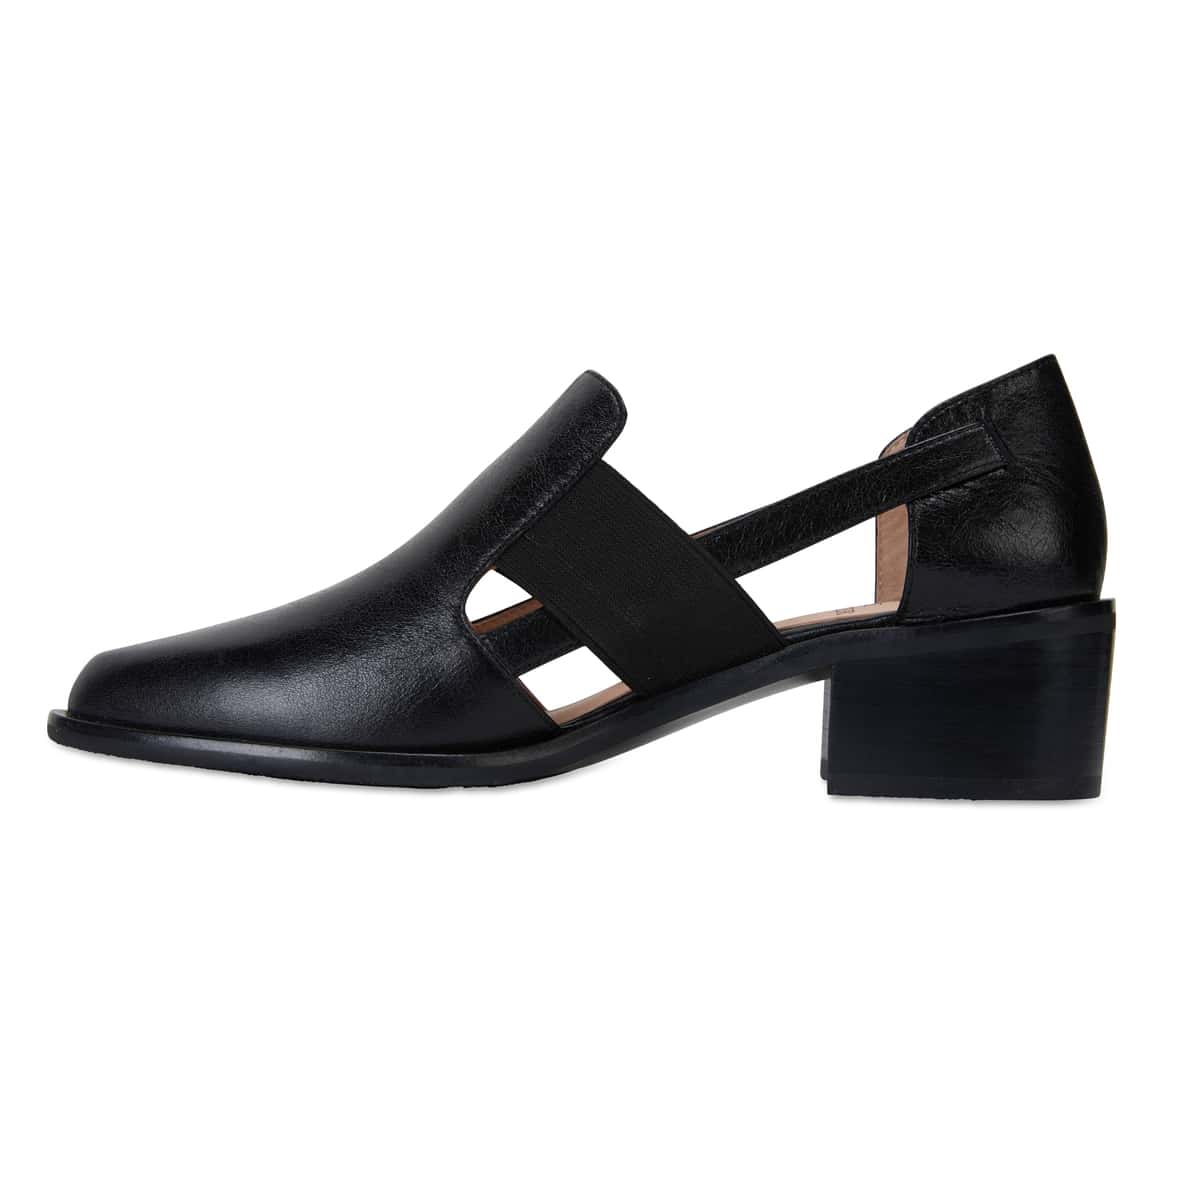 Expose Loafer in Black Oil Leather